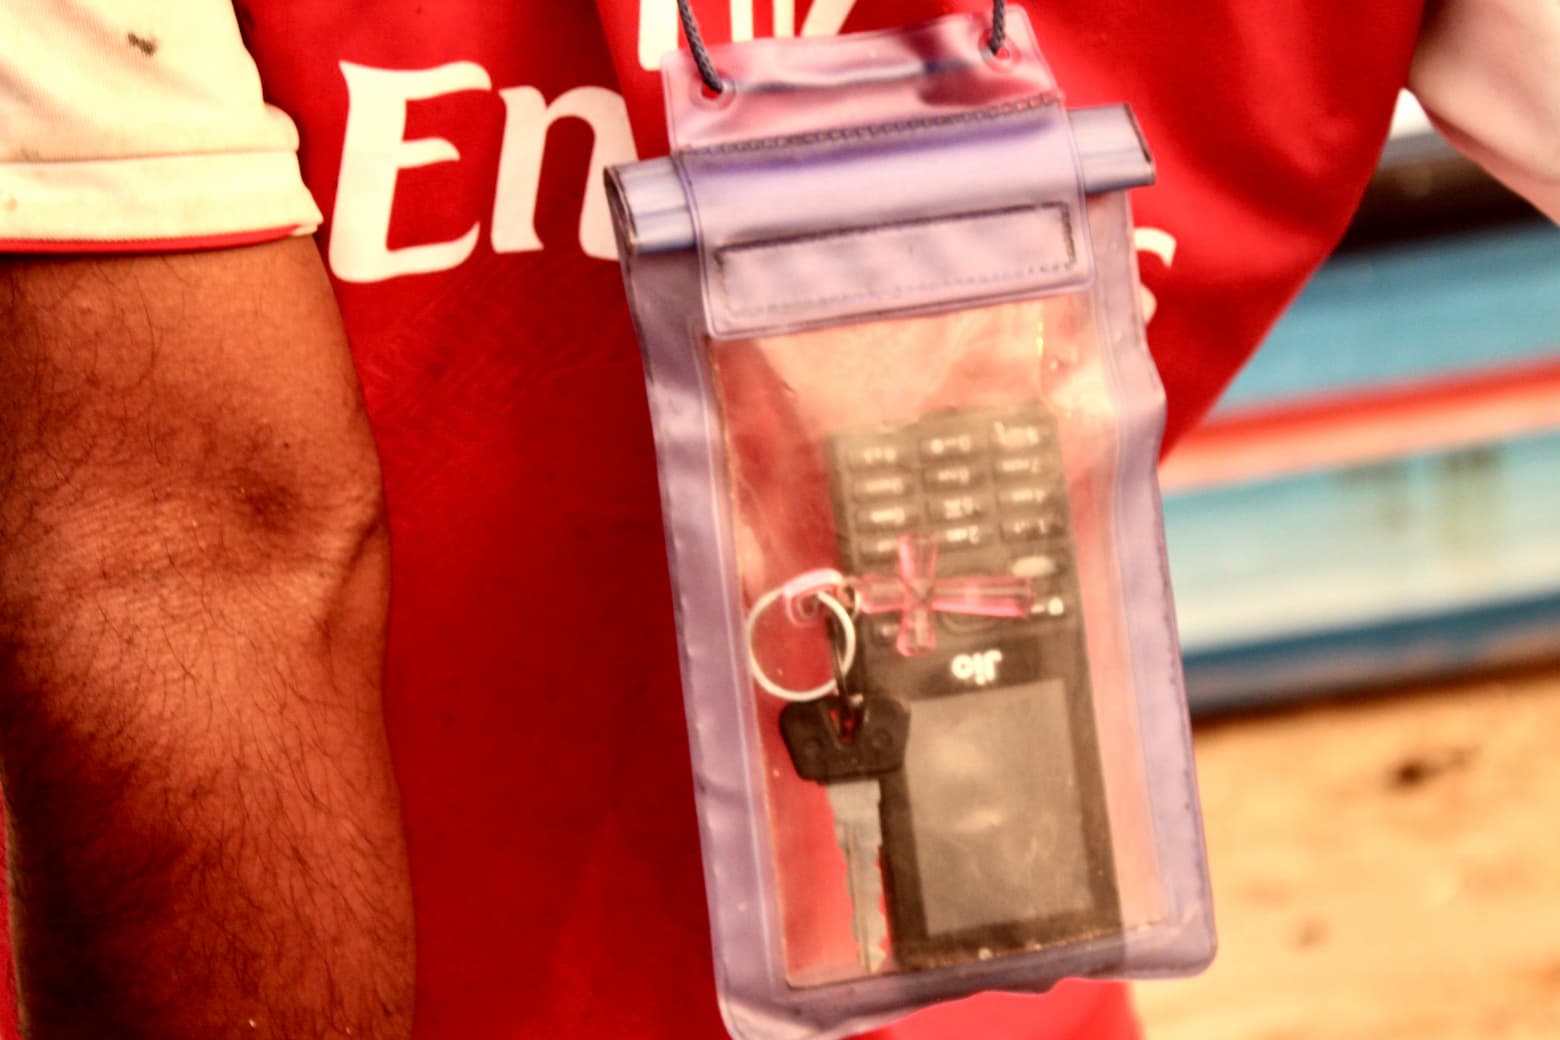 A fisherman keeps his mobile phone in a waterproof plastic pouch. Fishers routinely carry basic handsets that can help them communicate upto ten miles from the shore. Image: Max Martin